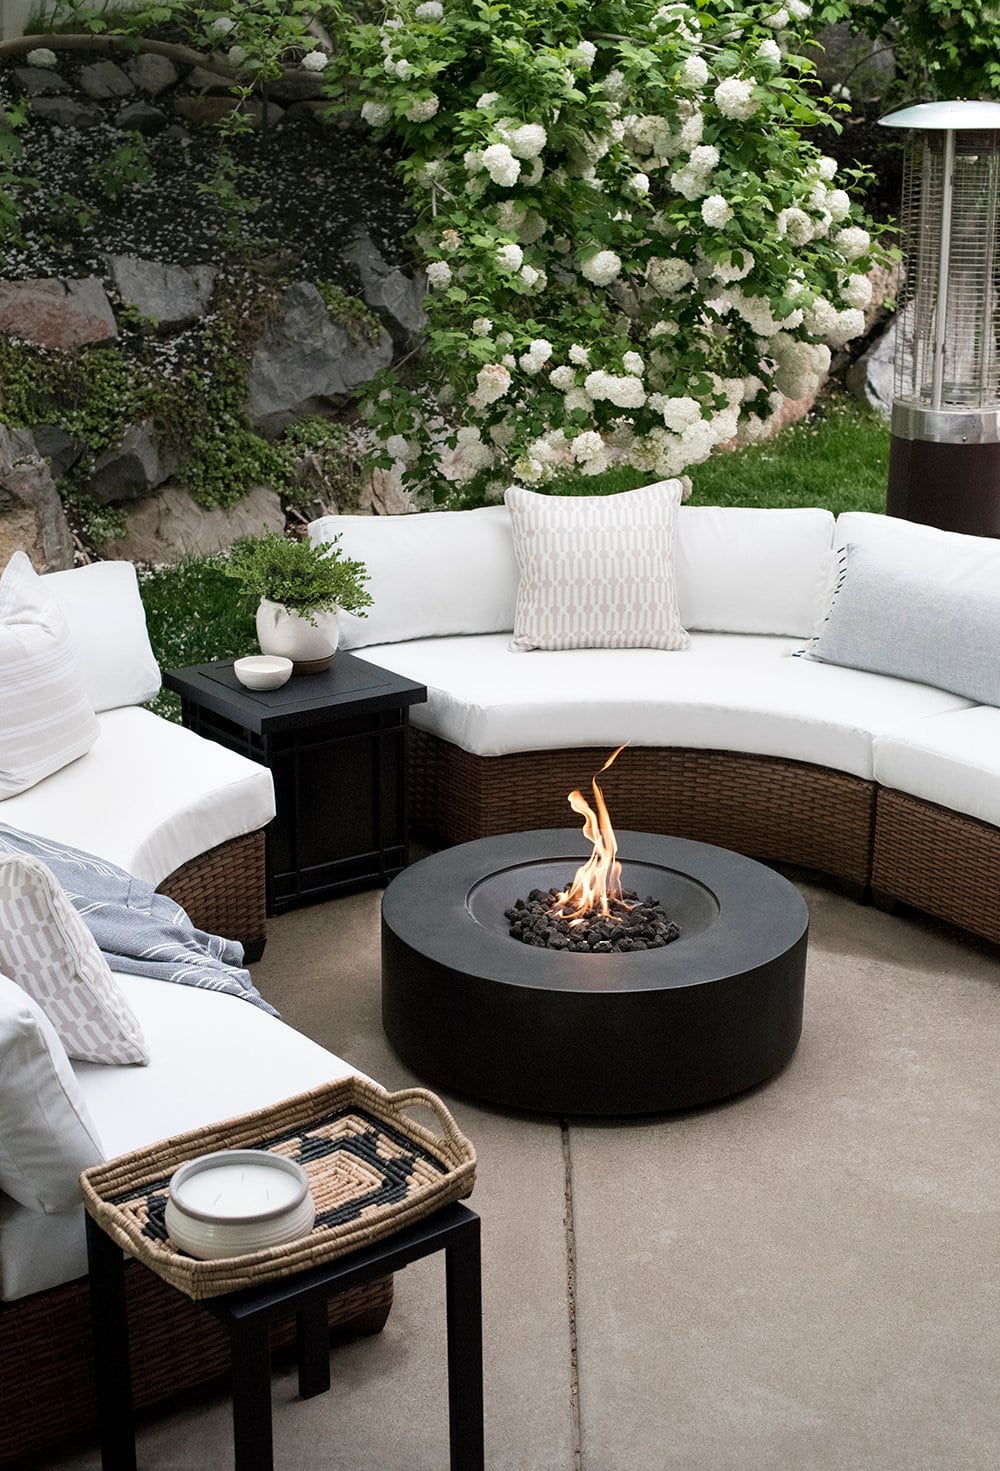 curved outdoor sofa with a black round fire pit int he middle